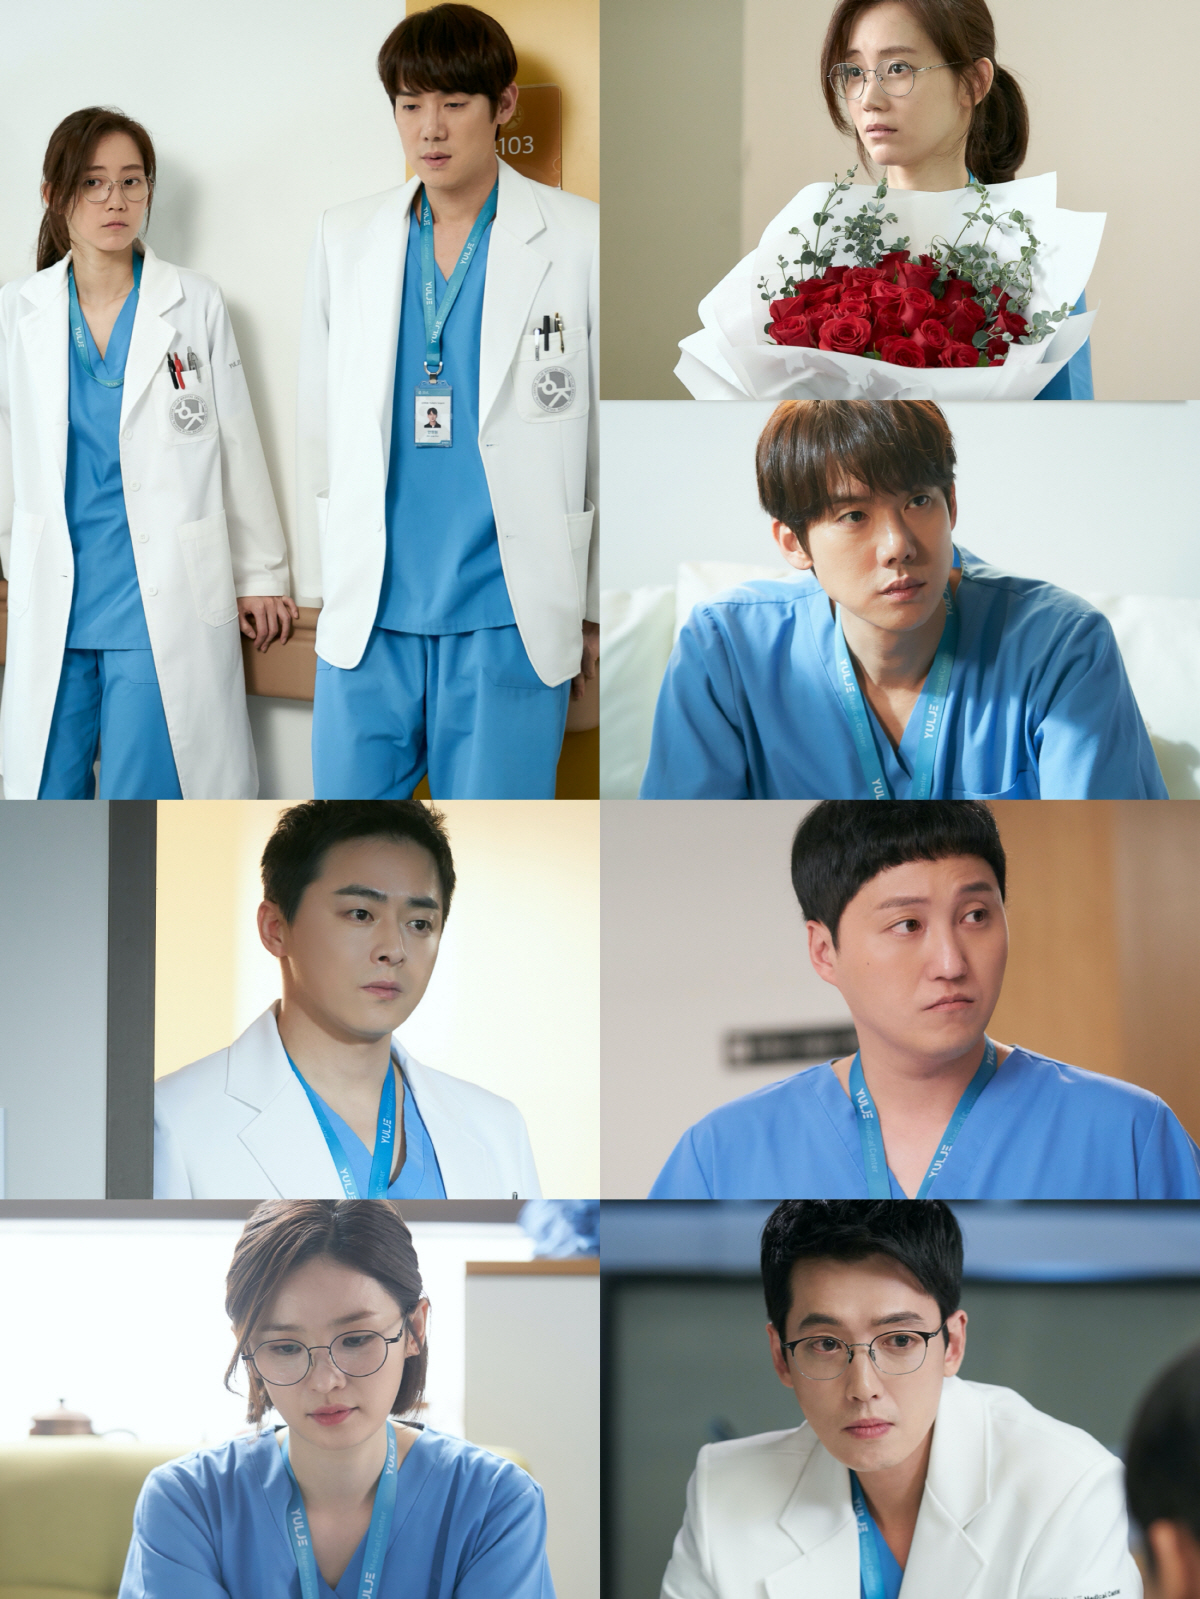 TVN 2020 Mokyo Special Spicy Physician Life (director Shin Won-ho, playwright Lee Woo-jung, planning tvN, production Eggscoming), which offers various fun and impressions through the relationship of ripe characters, amplifies the curiosity of the five people who are at the crossroads of choice.The public SteelSeries captures the attention of the winter (Shin Hyun-bin), who received a bouquet of roses from someone.Through the trailer, We are looking at love in winter, and I wondered if winter had begun a new love by folding my mind about the garden in the appearance of general surgeons who are more excited about me.Heres a look at Youre a good winter, right?I say good if it is good, said Ik-joon (Kyeong-seok Kwon), who floats the heart of the garden (Yoo Yeon-seok), and the image of the garden making an unknown expression raised curiosity.SteelSeries, which shows the five people who have reached a big and small turning point in life, doubles expectations for 10 episodes.First, Jun-wan (Jung Kyung-ho), who heard that Iksun (Kwak Sun-young) was attached to the doctoral course, draws attention with his complex expression.In the trailer, Im sorry the garden quits Physician.It is rare for such a friend as a Physician, said the chairman (Kim Kap-soo), who doubles the question of whether the garden will quit Physician and go on the path of a bride who has dreamed for a long time, and what is the heart for winter.Here, the serious appearance of Ikjun, Seok-hyung (Kim Dae-myung) and Songhwa (Jeonmido) can be felt as a Physician, adding to the expectation.On the other hand, Spicy Physician Life is a drama about the chemistry of 20-year-old Friends who can see people living in a special day and eyes in a hospital called a miniature version of life where someone is born and someone ends life.It airs every Thursday night at 9 p.m., and 10 episodes at 9 p.m. today (14th).